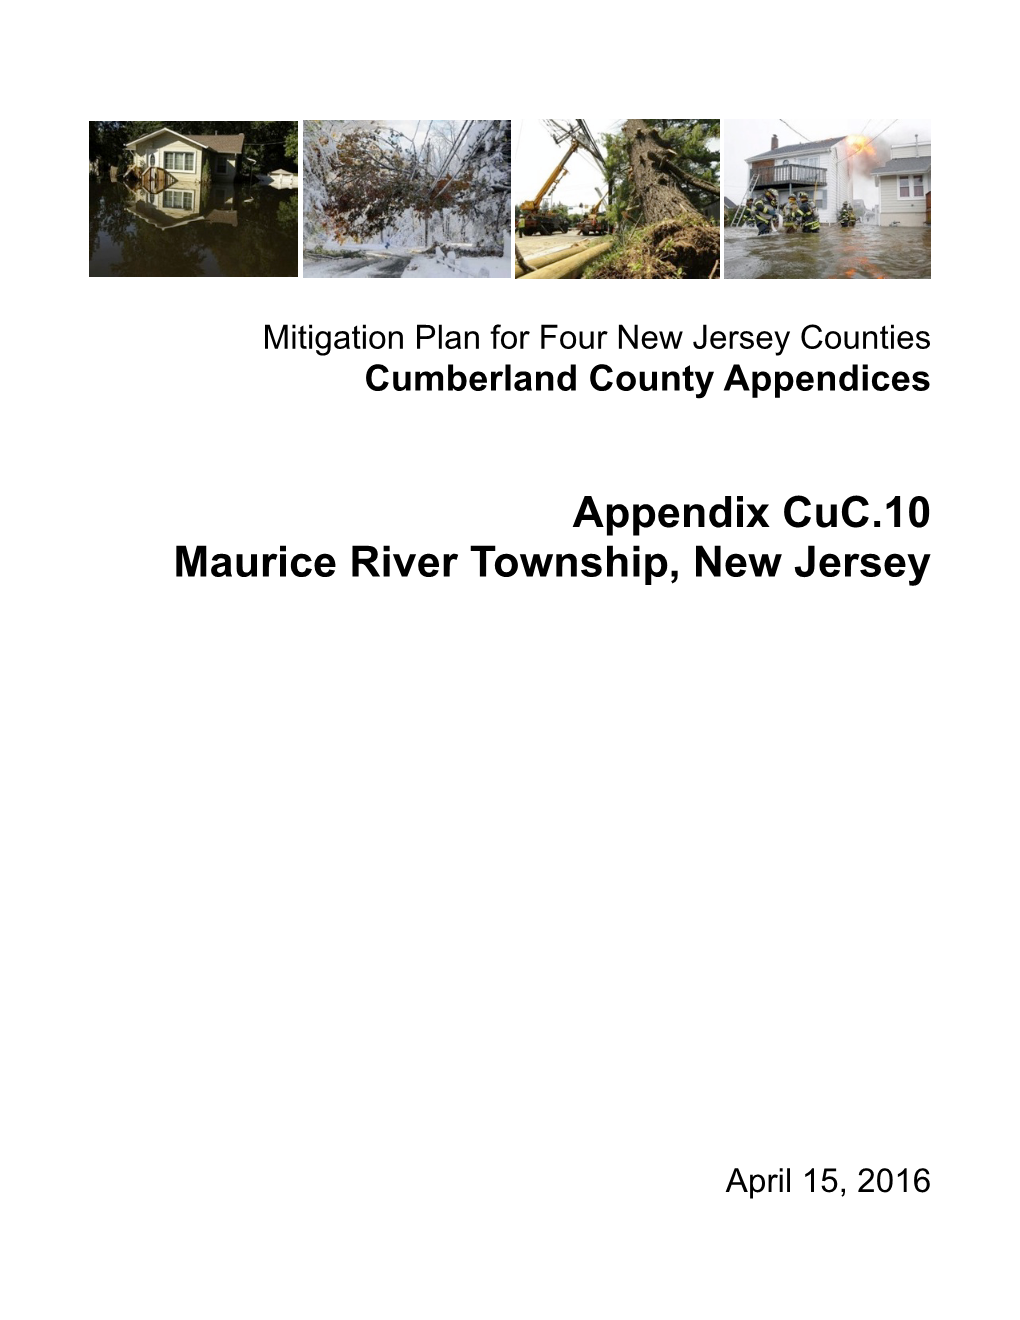 Appendix Cuc.10 Maurice River Township, New Jersey